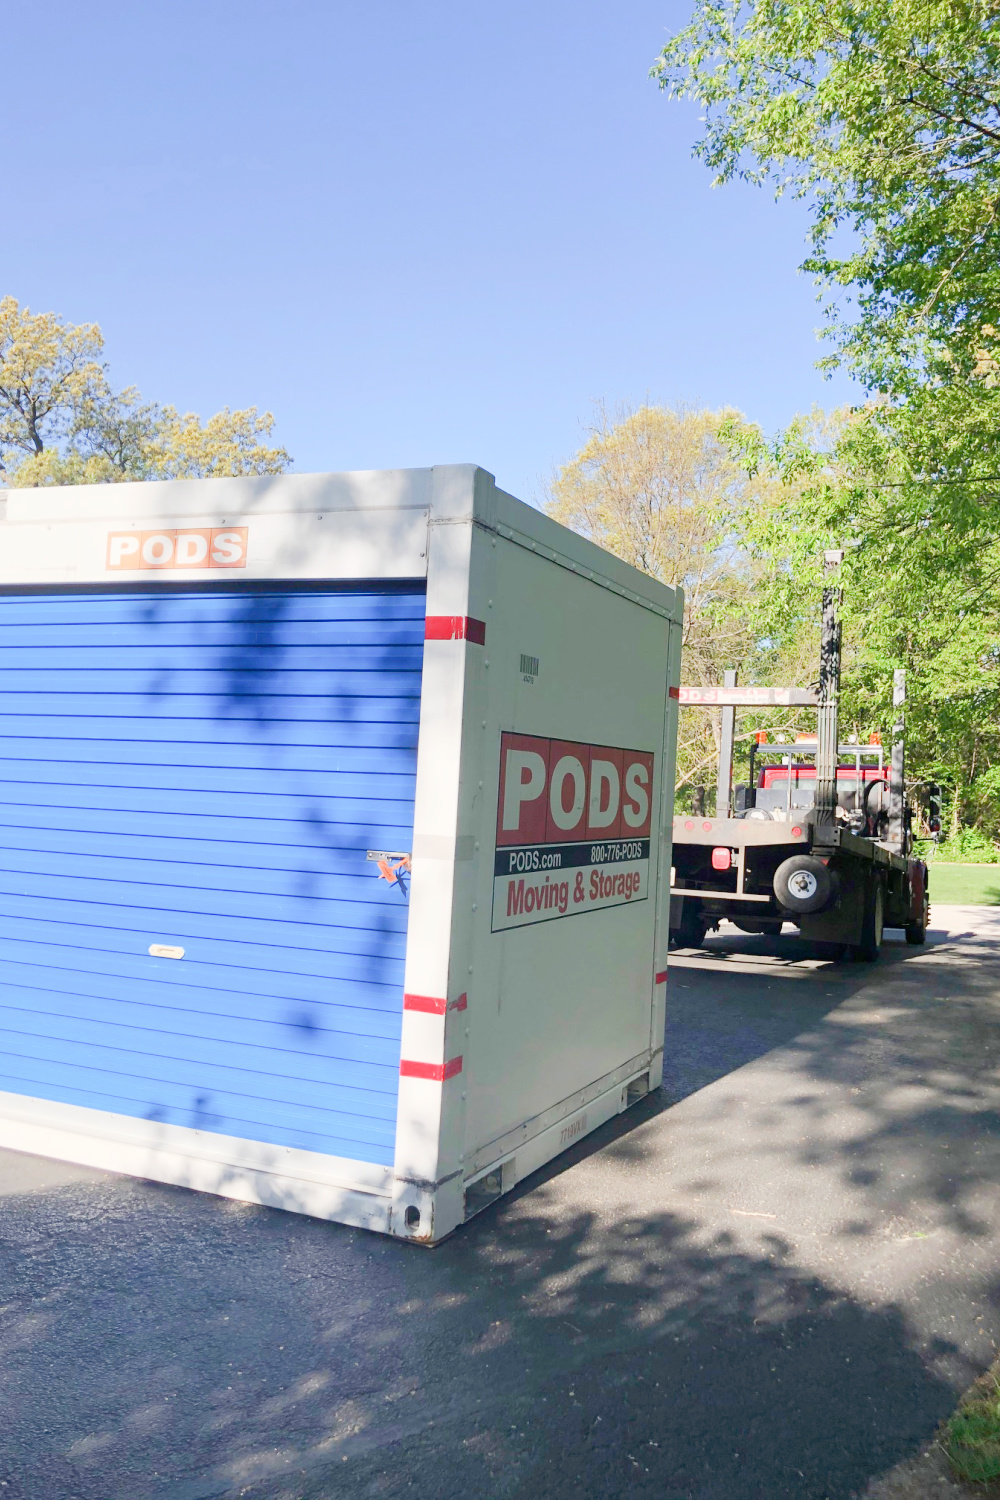 PODS container move from CO - learn tips to simplify moving on Hello Lovely. #pods #relocation #movingtips #movinghacks #movingcontainers